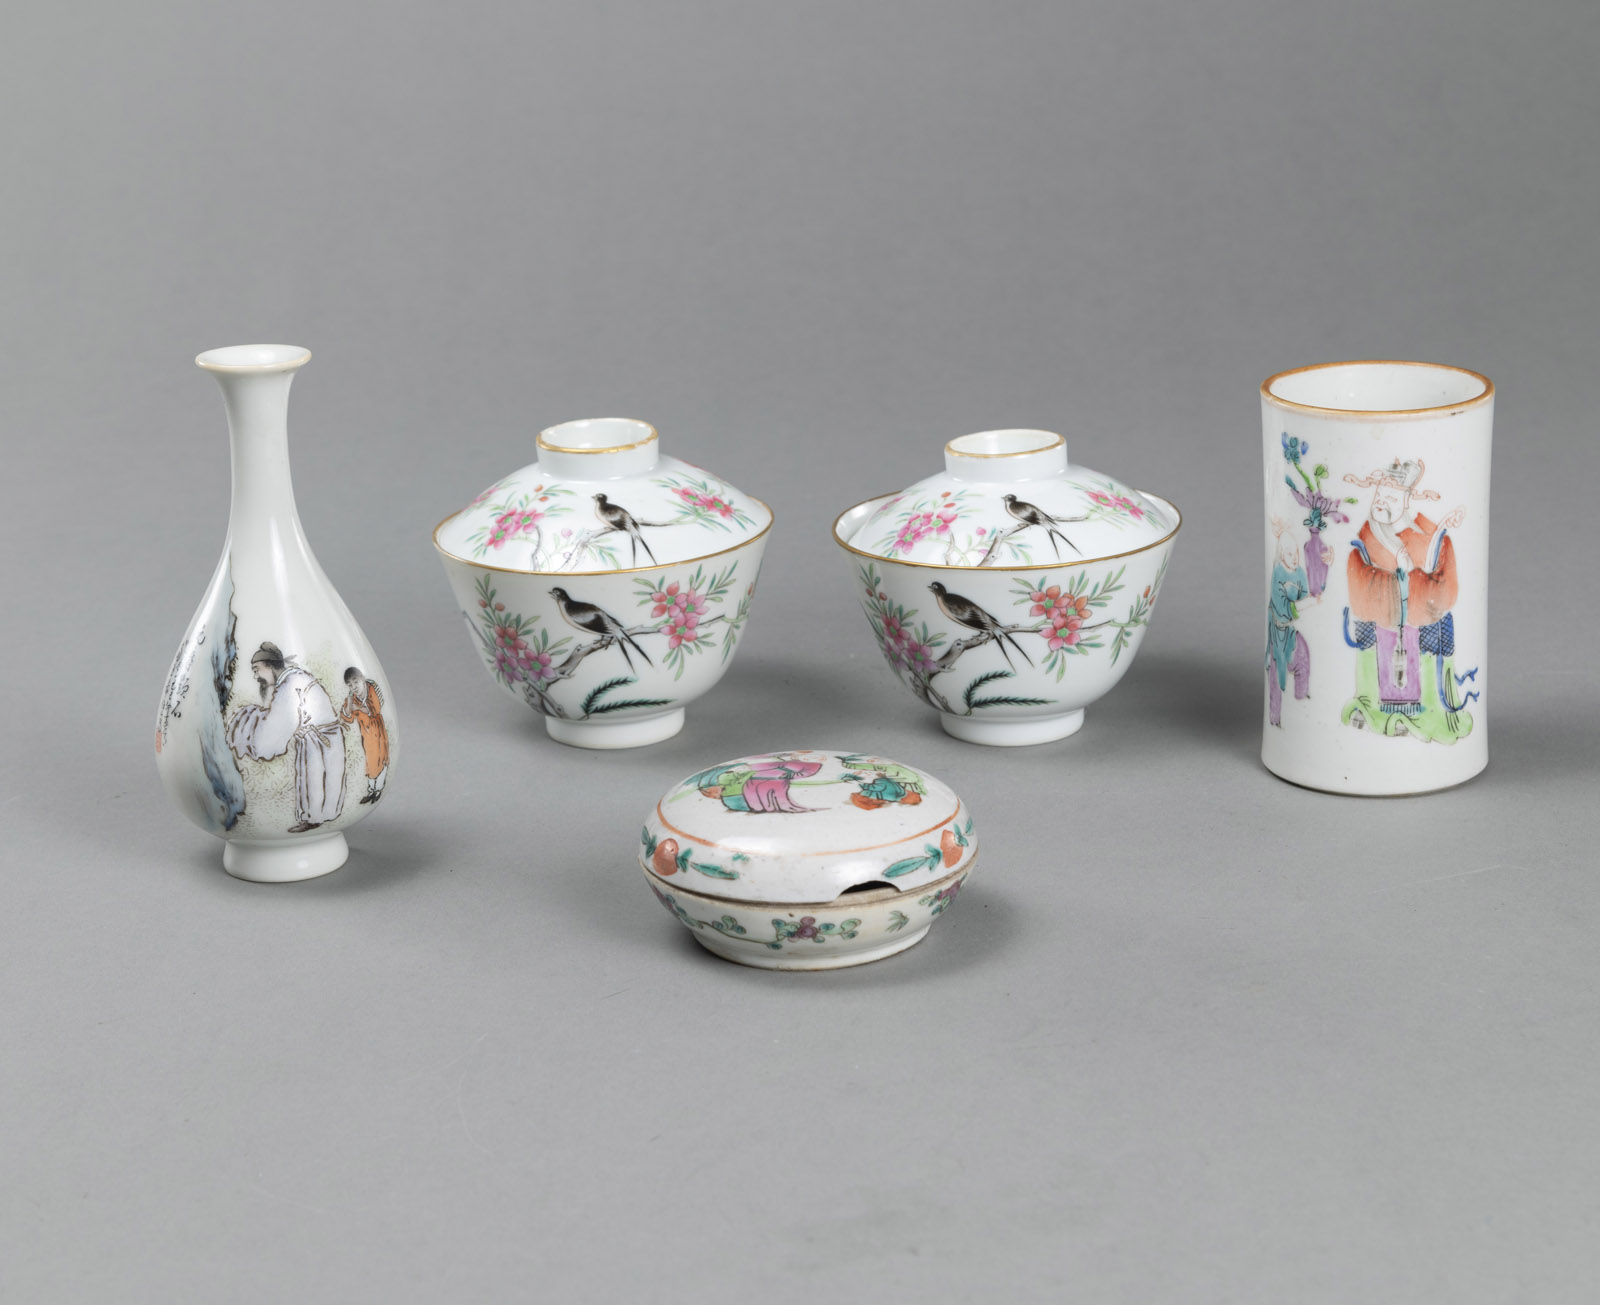 <b>TWO LIDDED 'FAMILLE ROSE' BOWLS, A SEAL WAX BOX, A BRUSHPOT, AND A BOTTLE VASE</b>